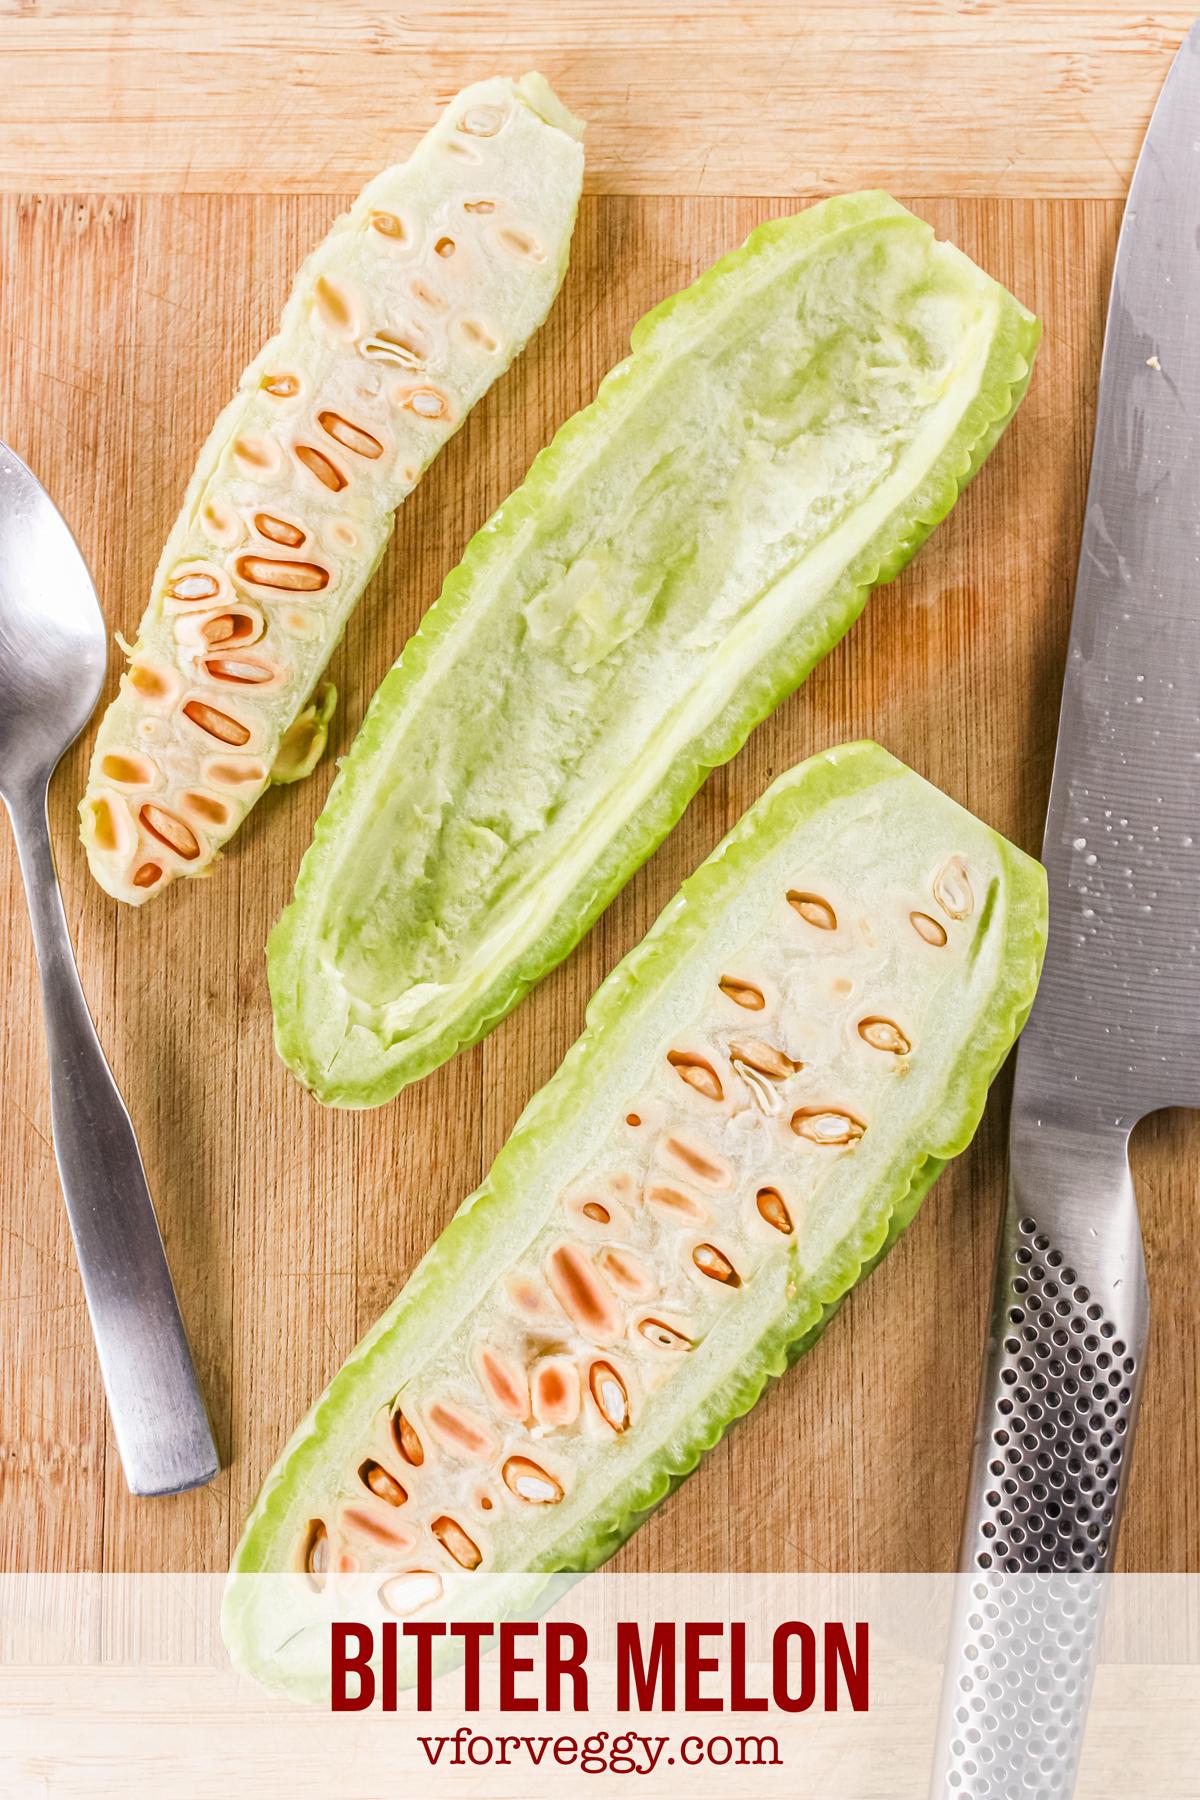 How to cut and clean bitter melon.